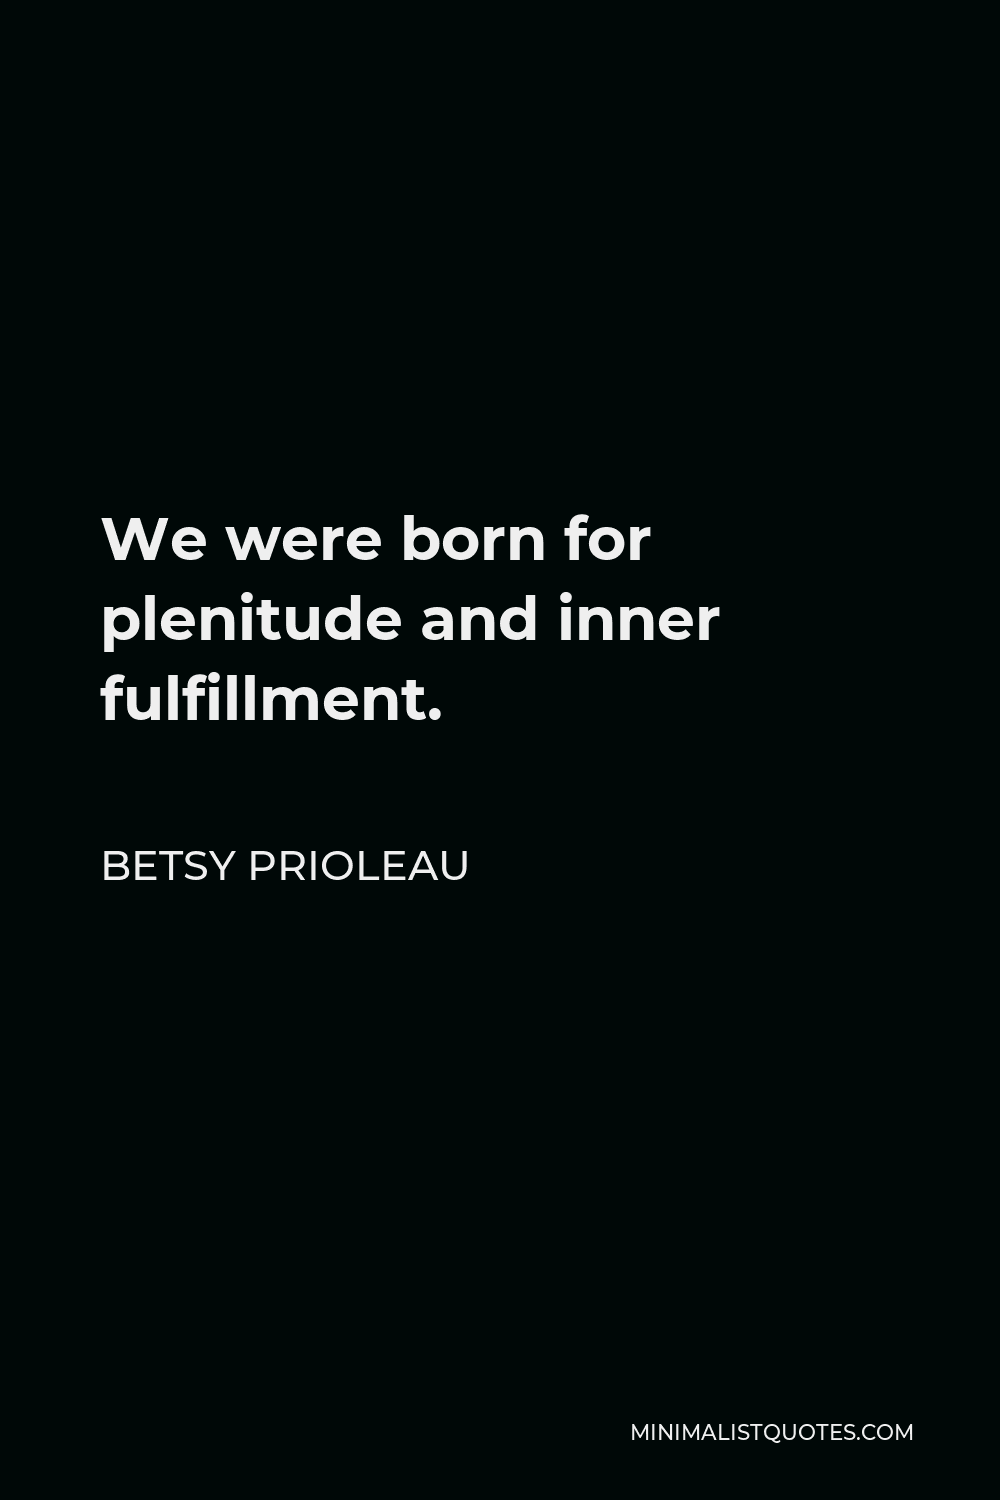 Betsy Prioleau Quote - We were born for plenitude and inner fulfillment.